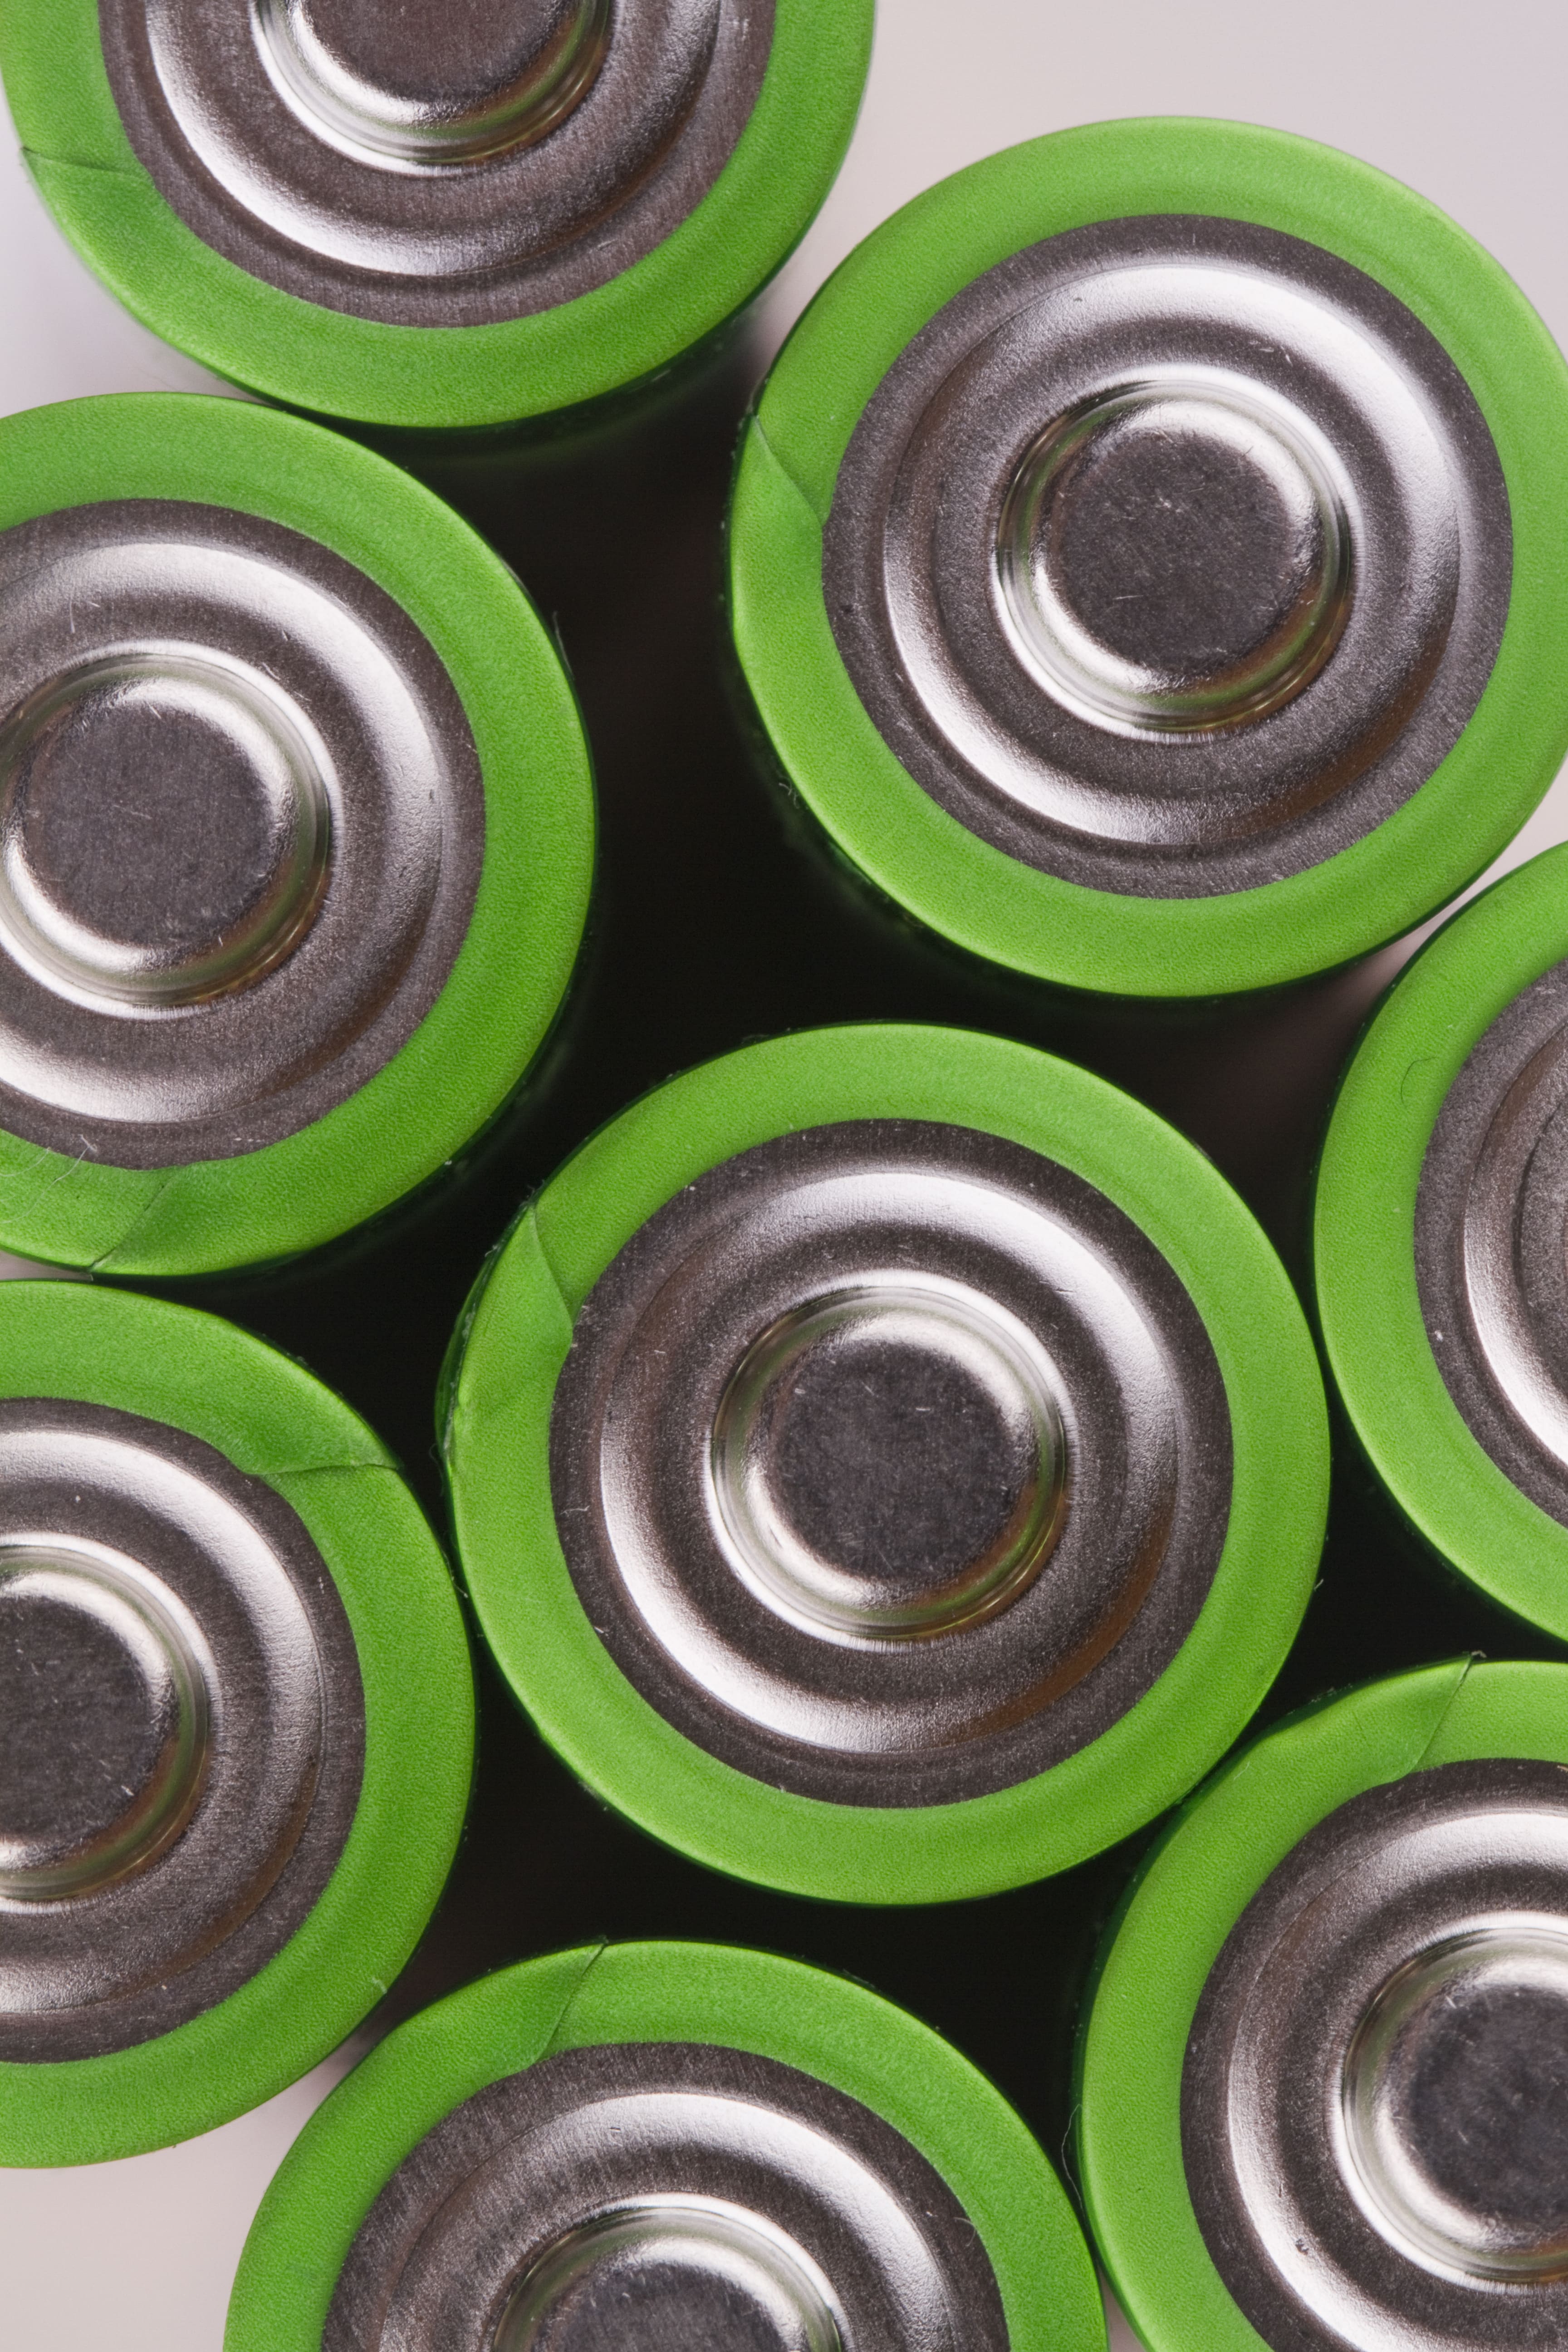 Balancing the positives and negatives – The rise of the battery ecosystem